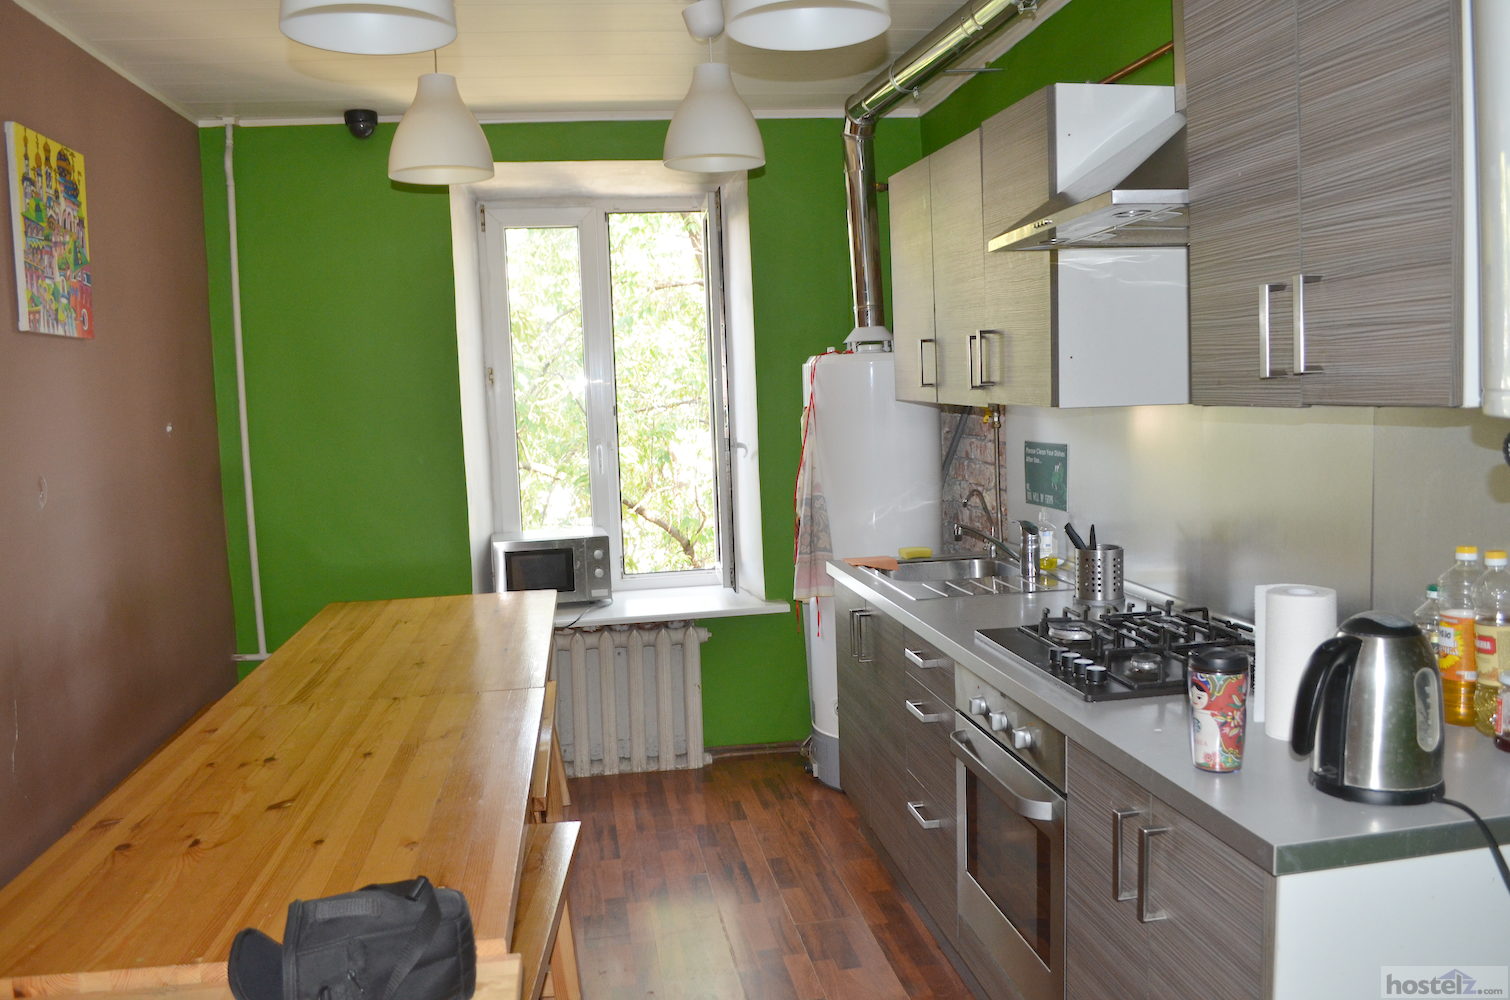 One of the hostel kitchens